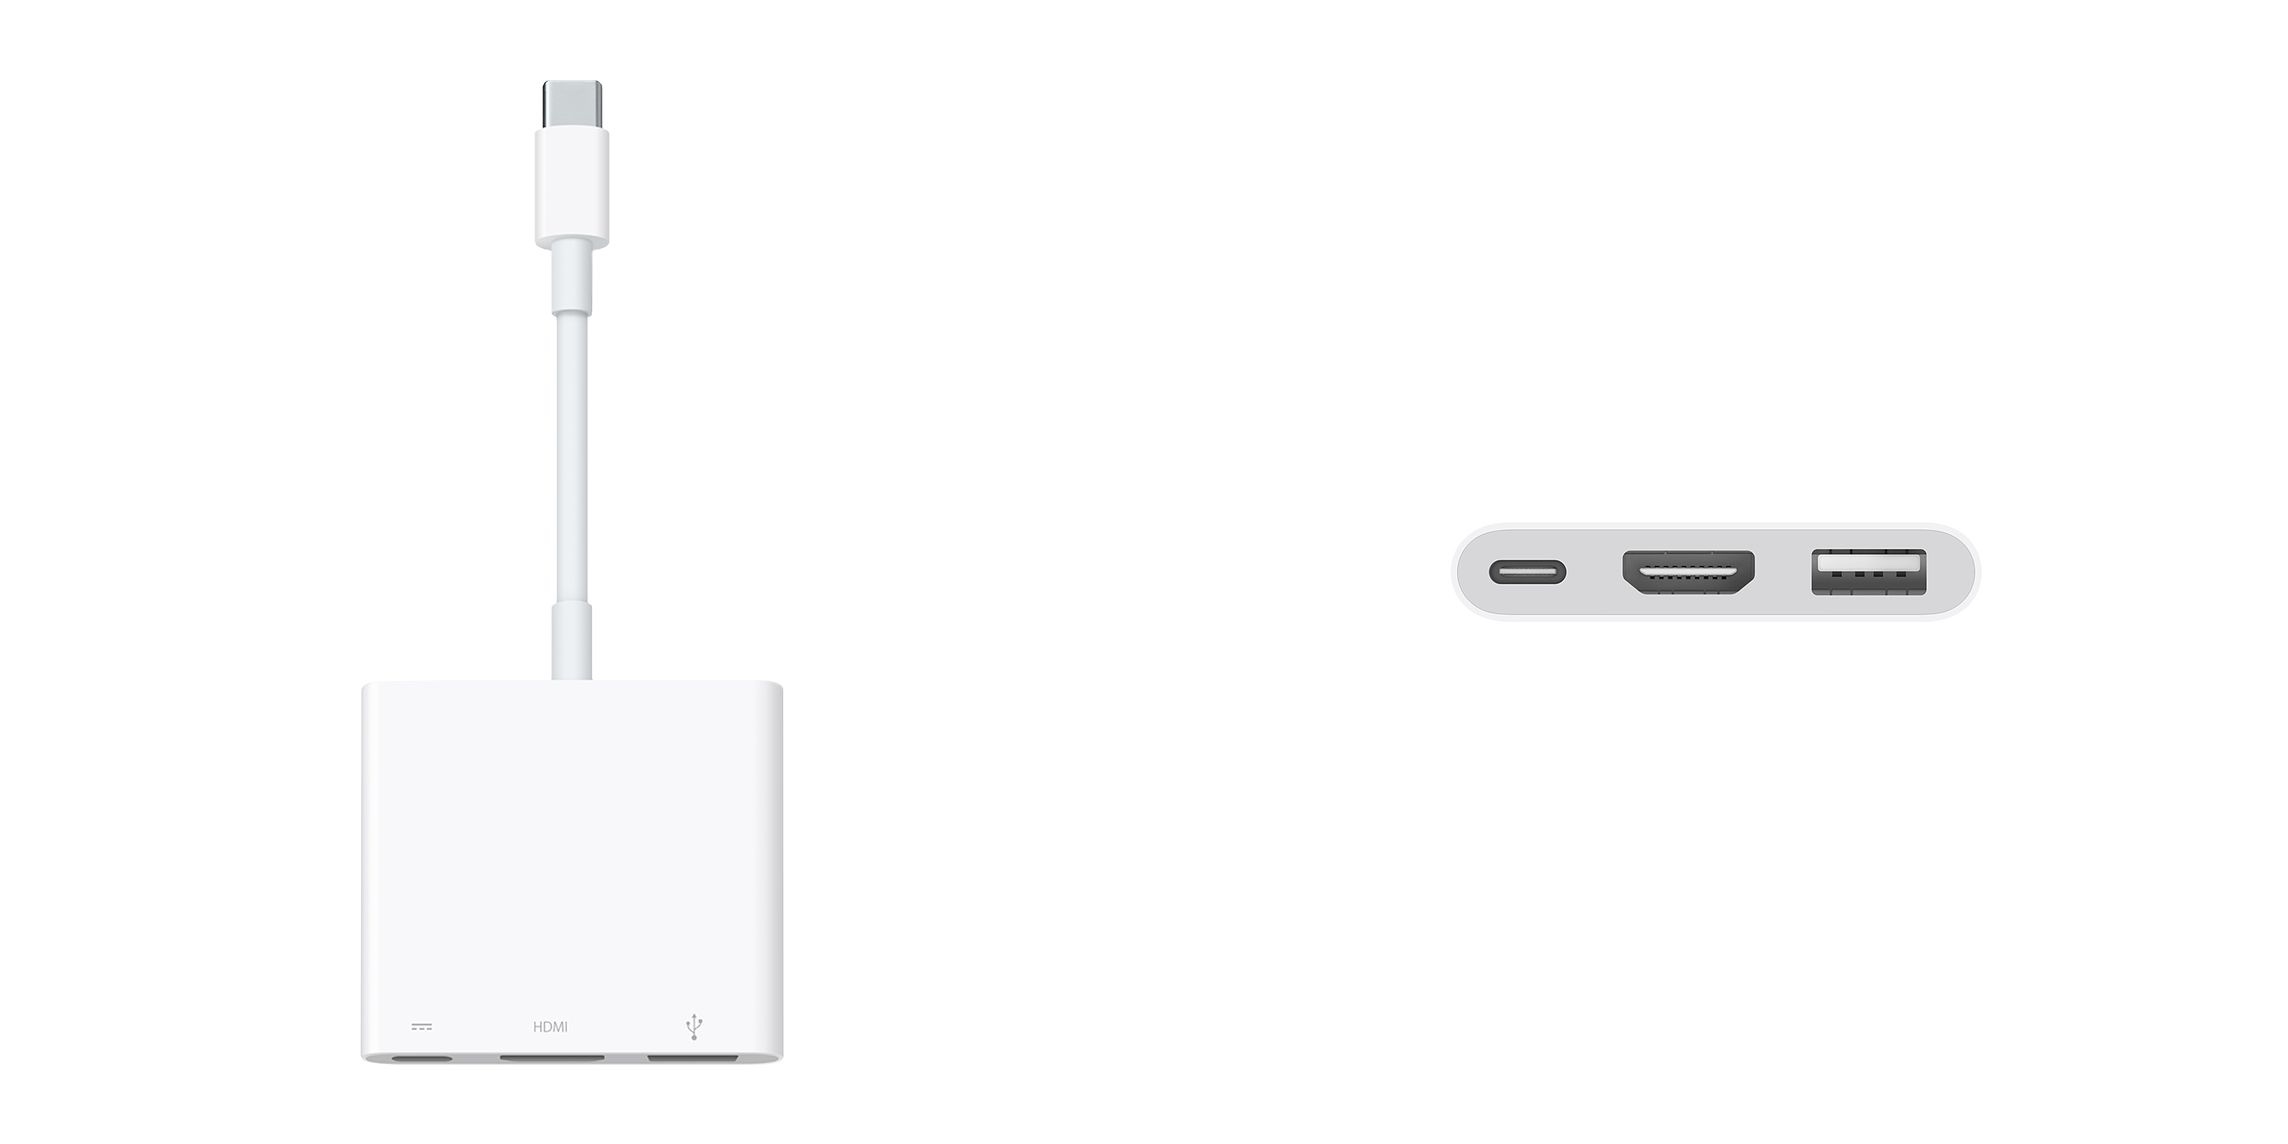 Apple Releases USB-C Digital AV Multiport Adapter with HDMI 2.0 Support 1